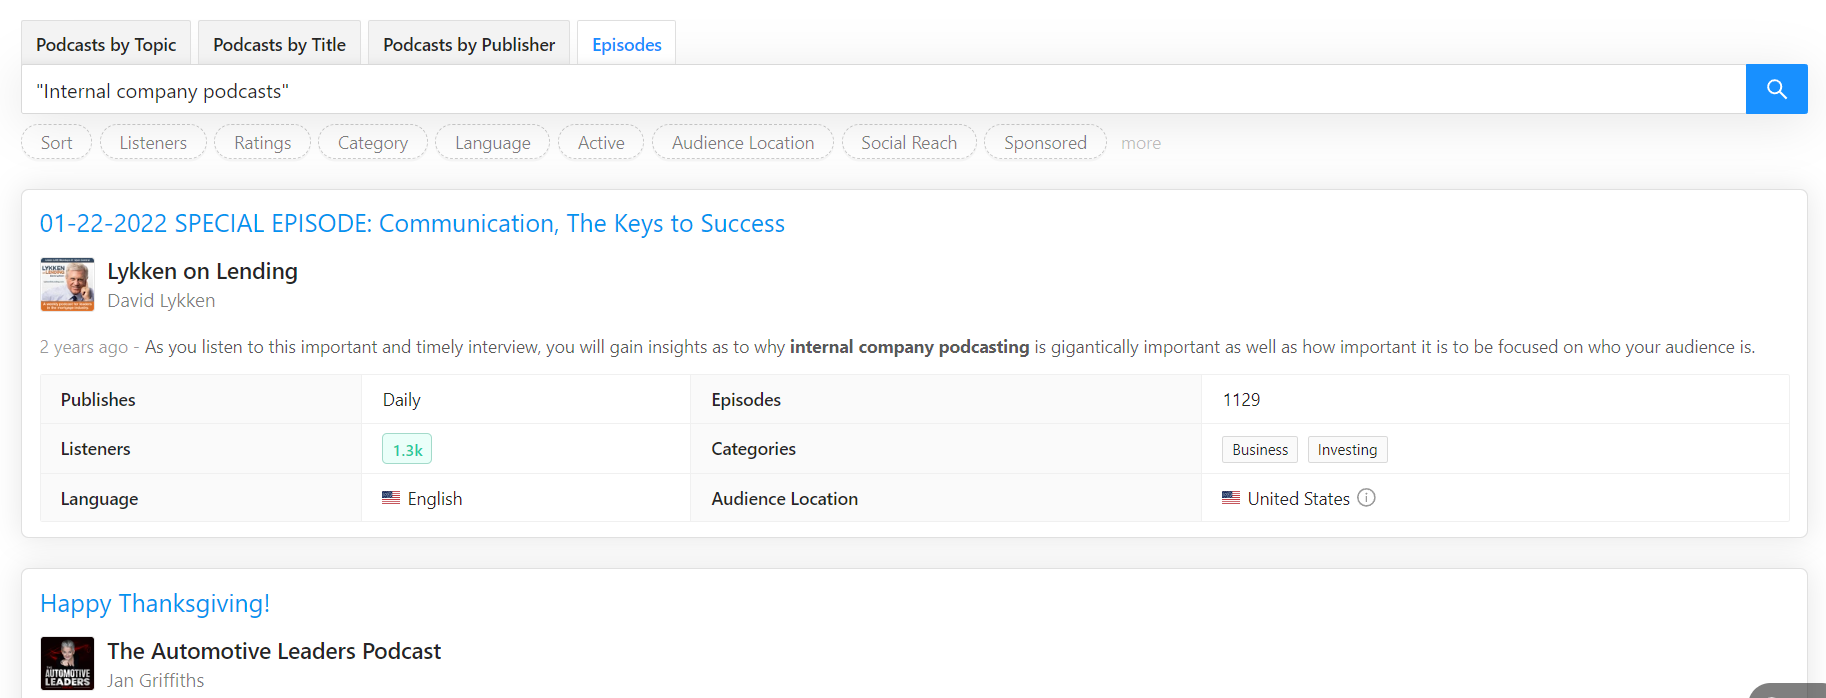 Internal Company Podcasts: Everything You Need to Know